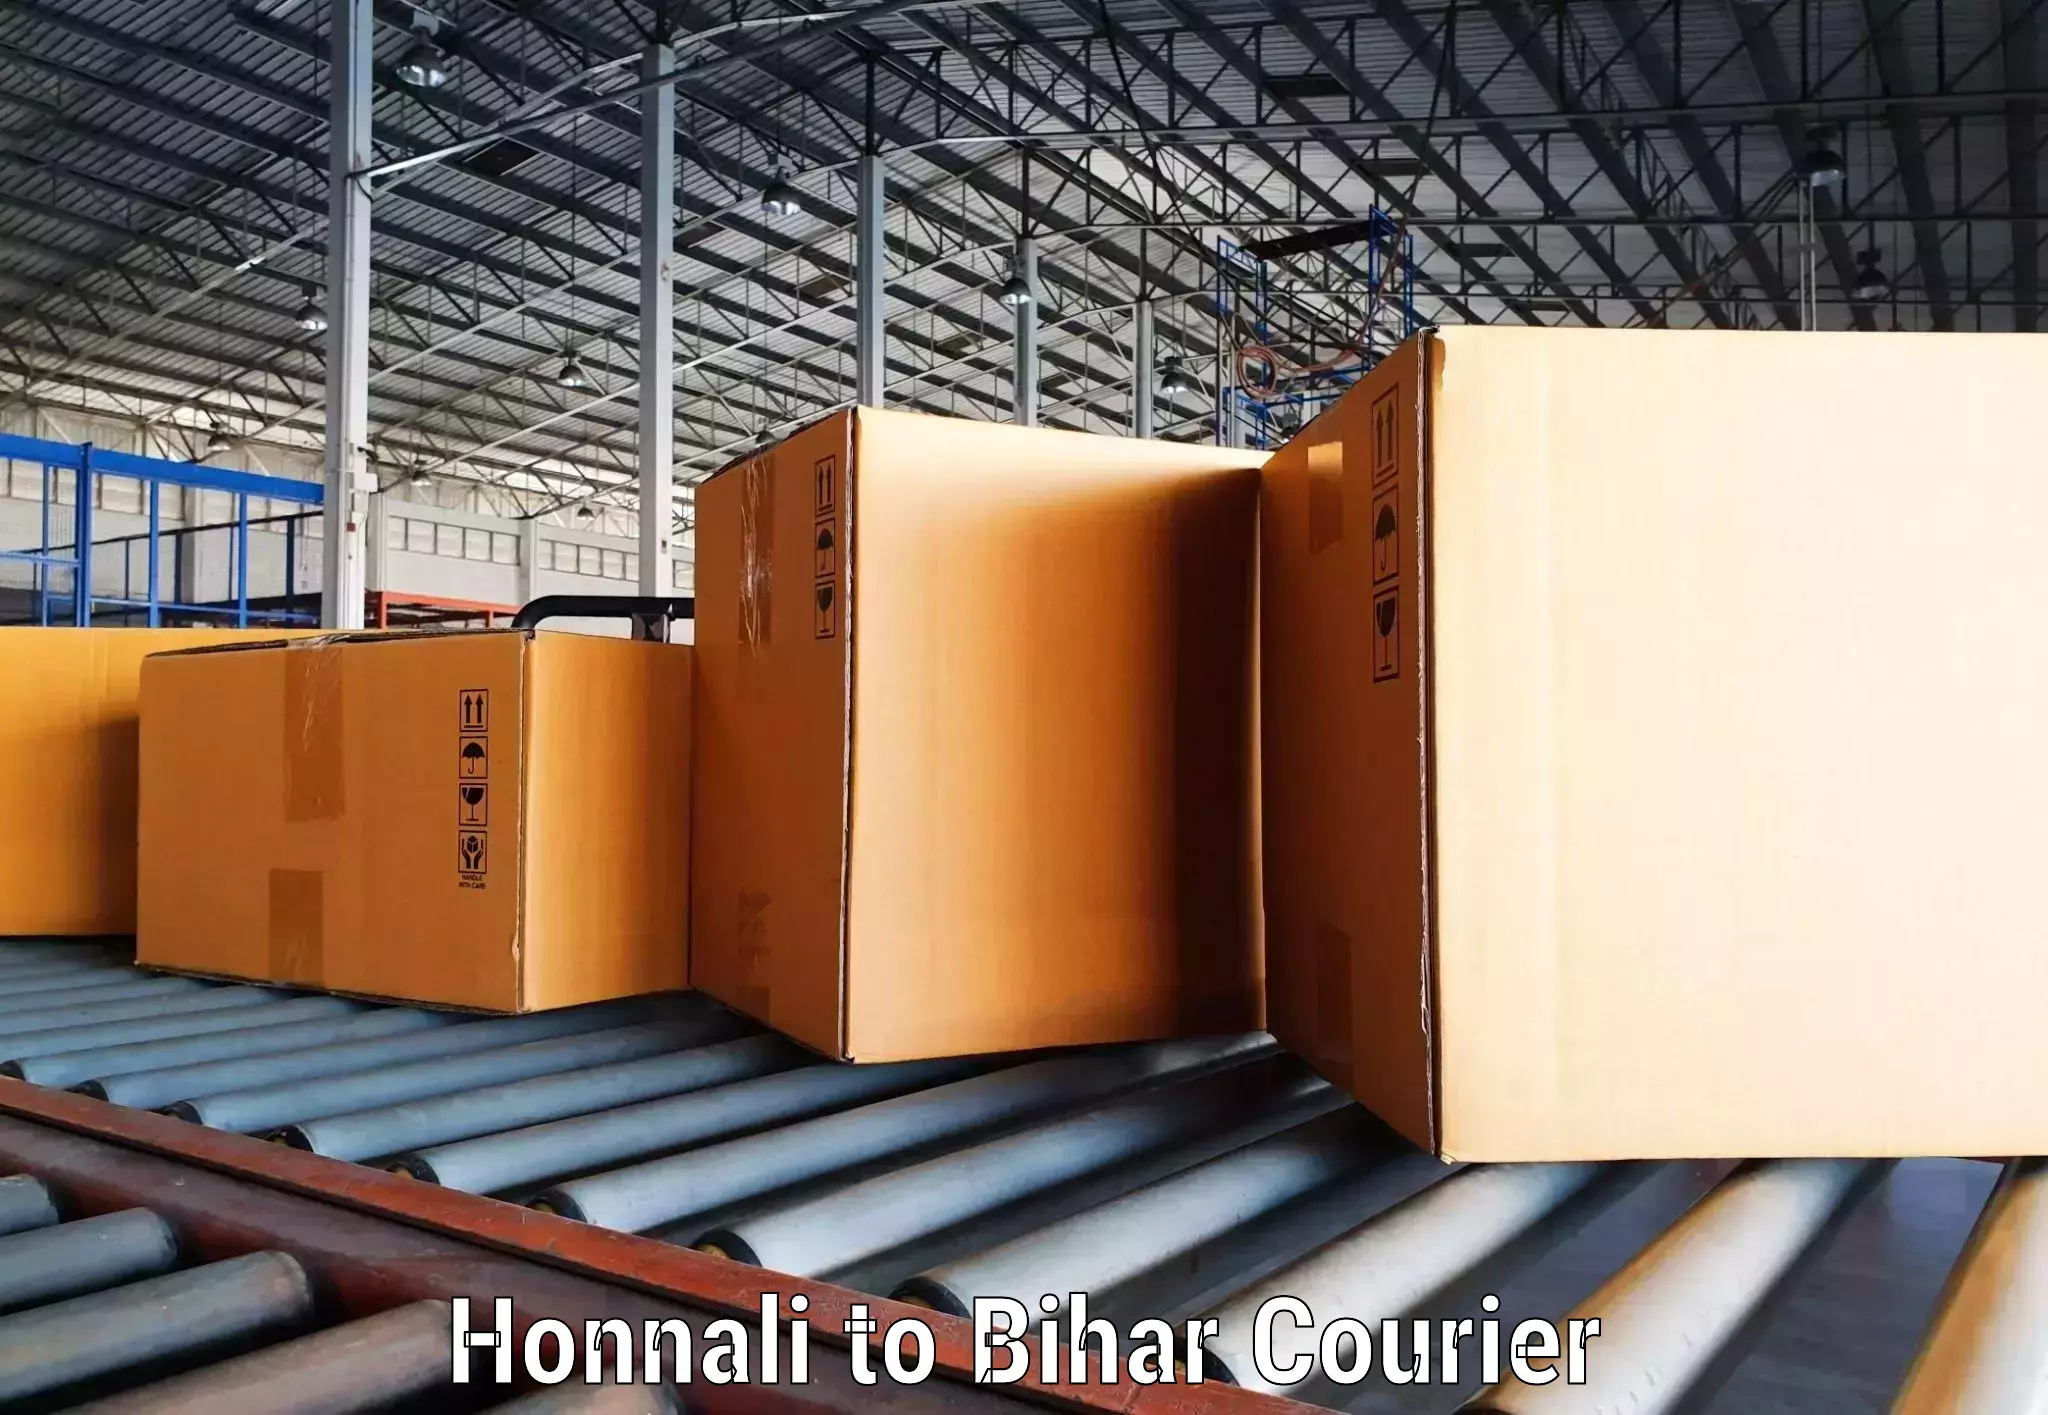 Parcel handling and care Honnali to Bihar